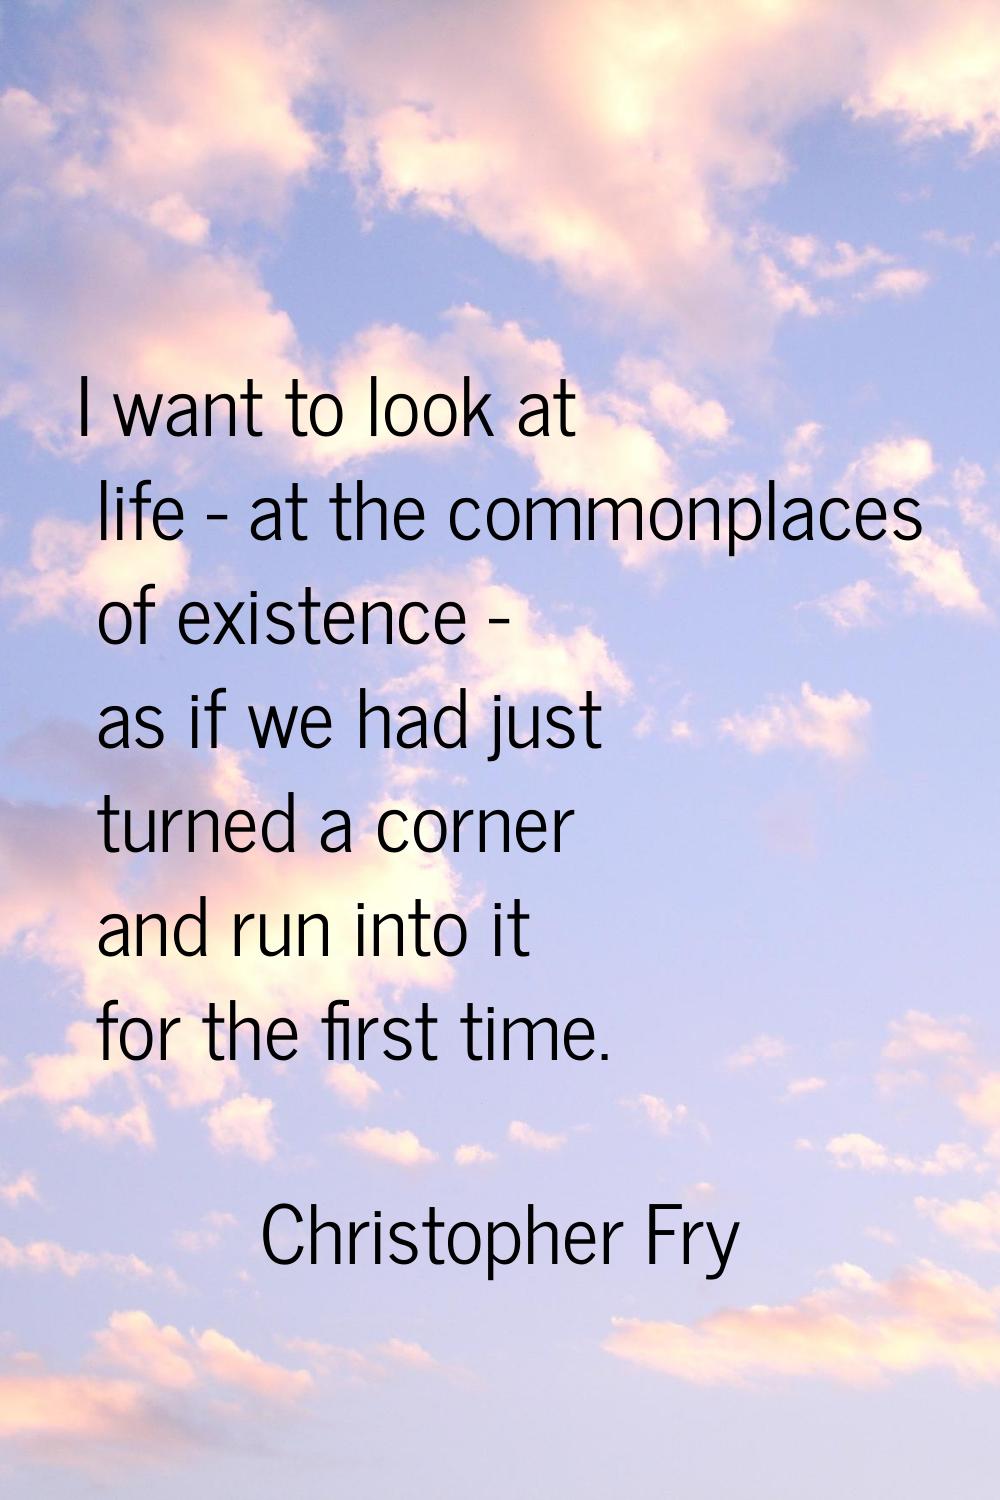 I want to look at life - at the commonplaces of existence - as if we had just turned a corner and r